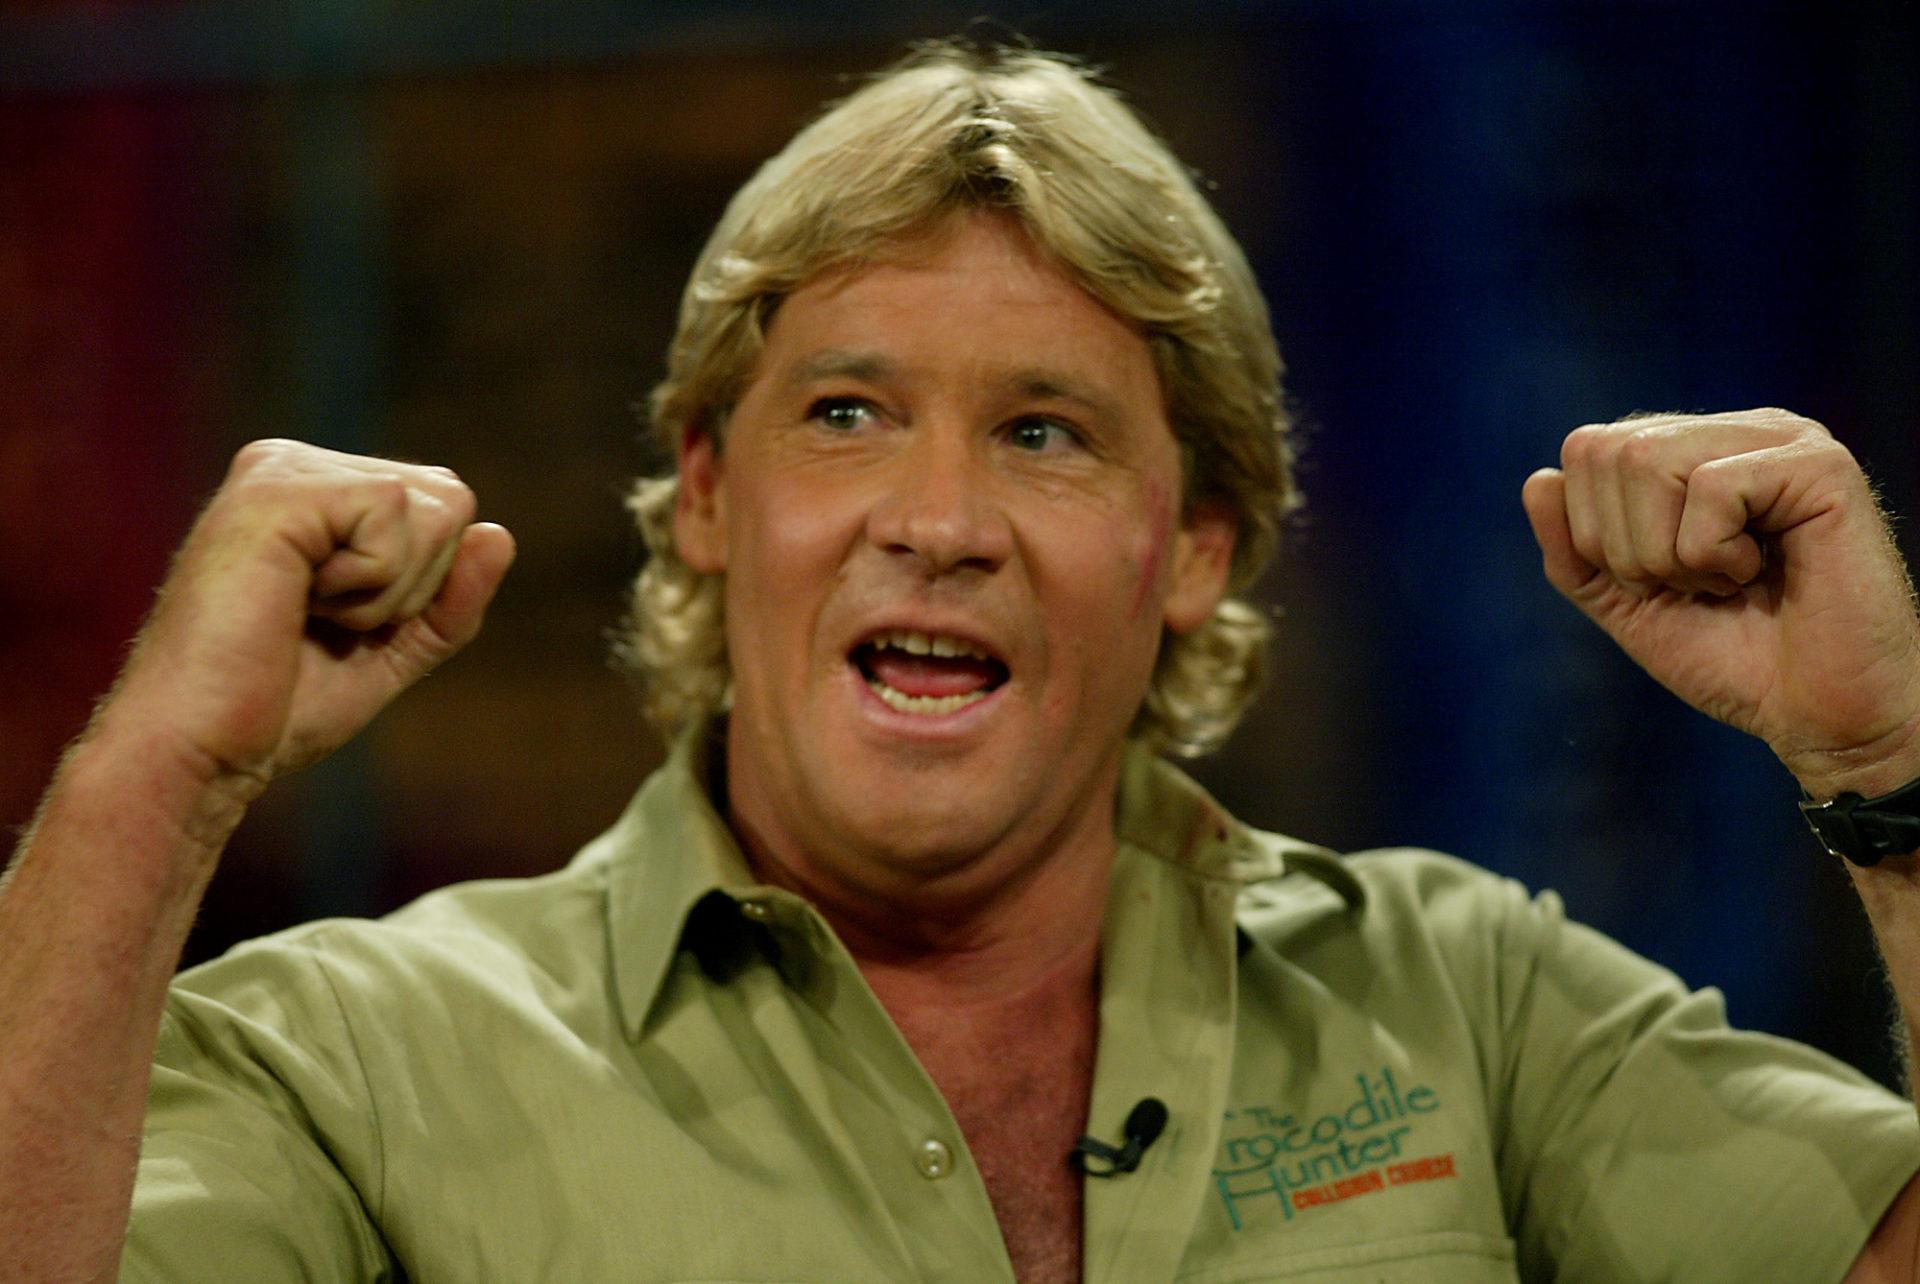 STEVE IRWIN, Australian zookeeper and conservationist, has become a media starwith his cable TV sho